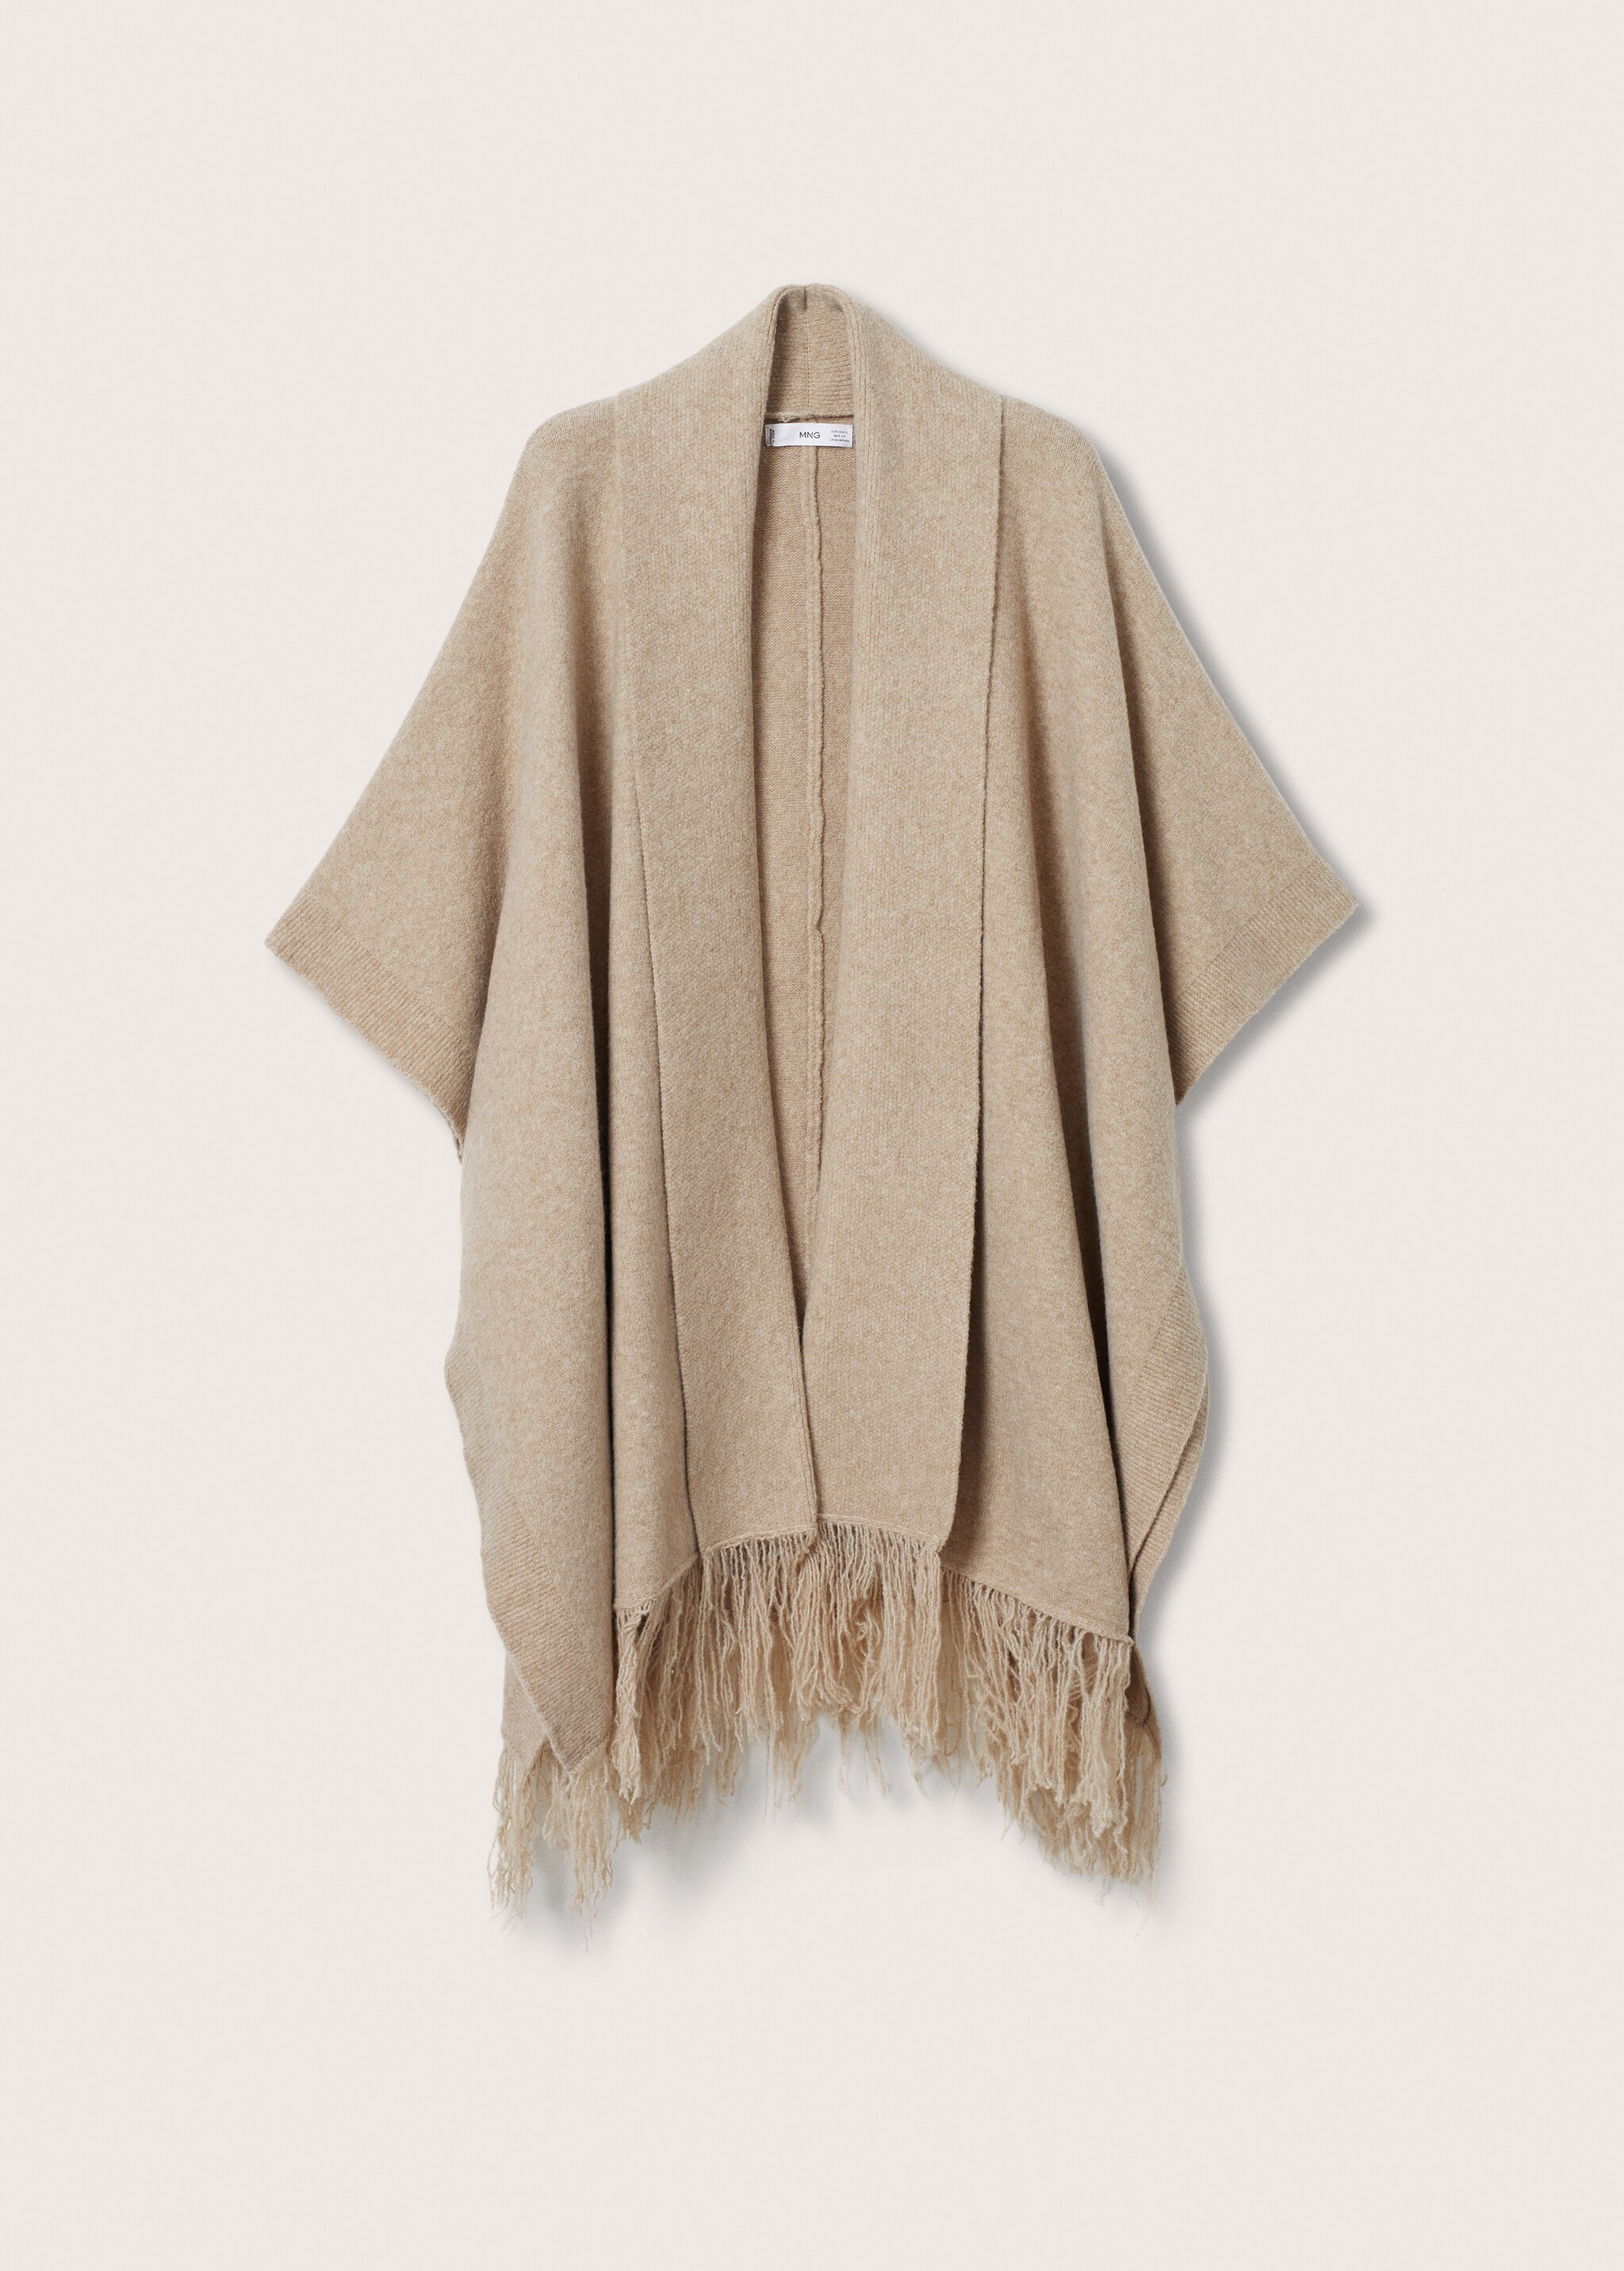 Fringe knit cape - Article without model